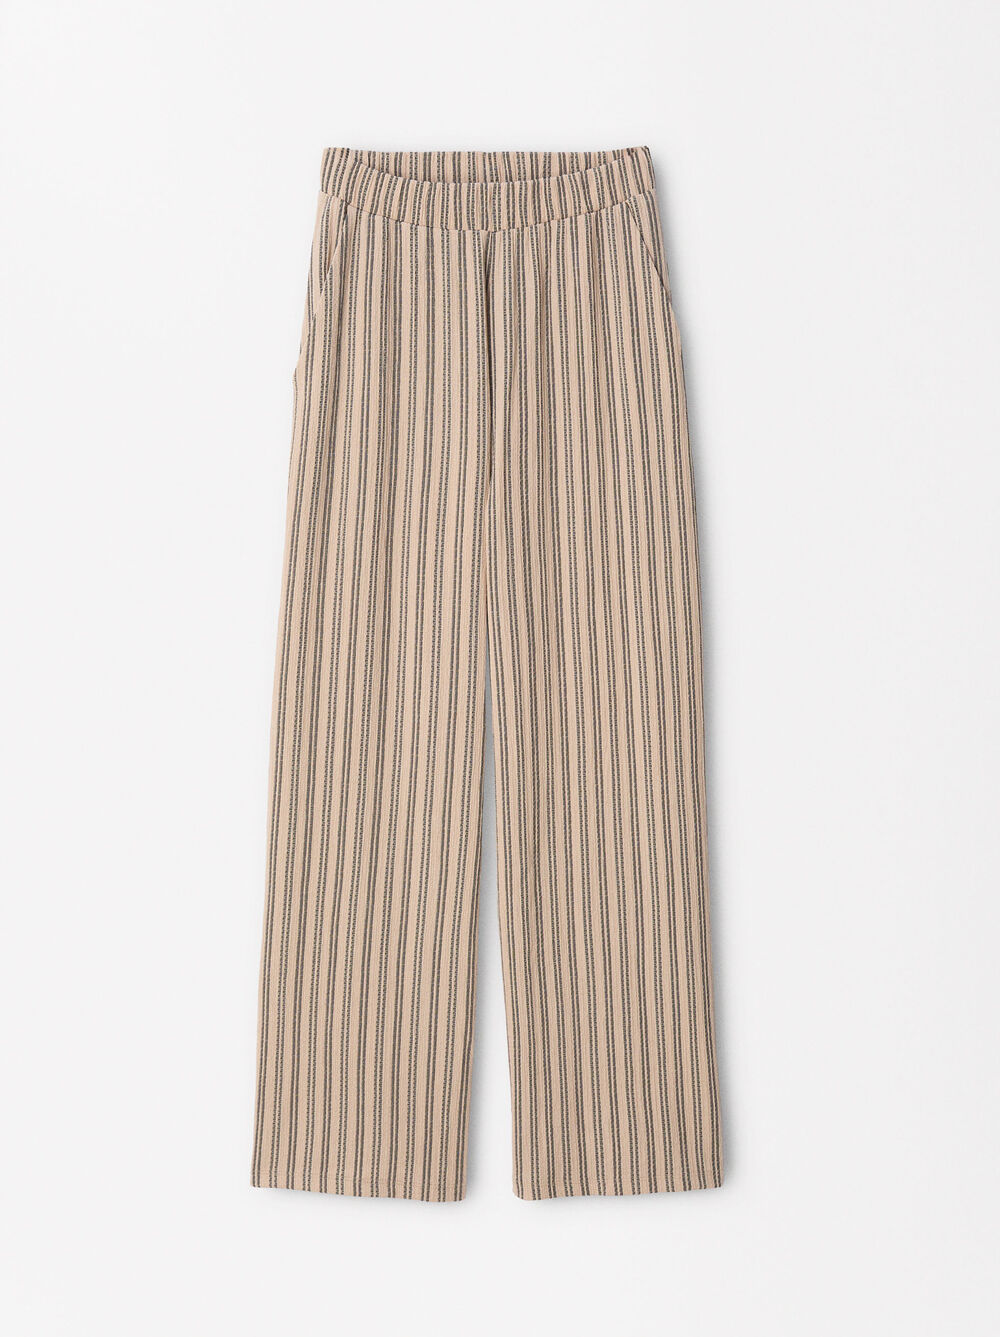 Textured Pants With Elastic Waistband image number 0.0